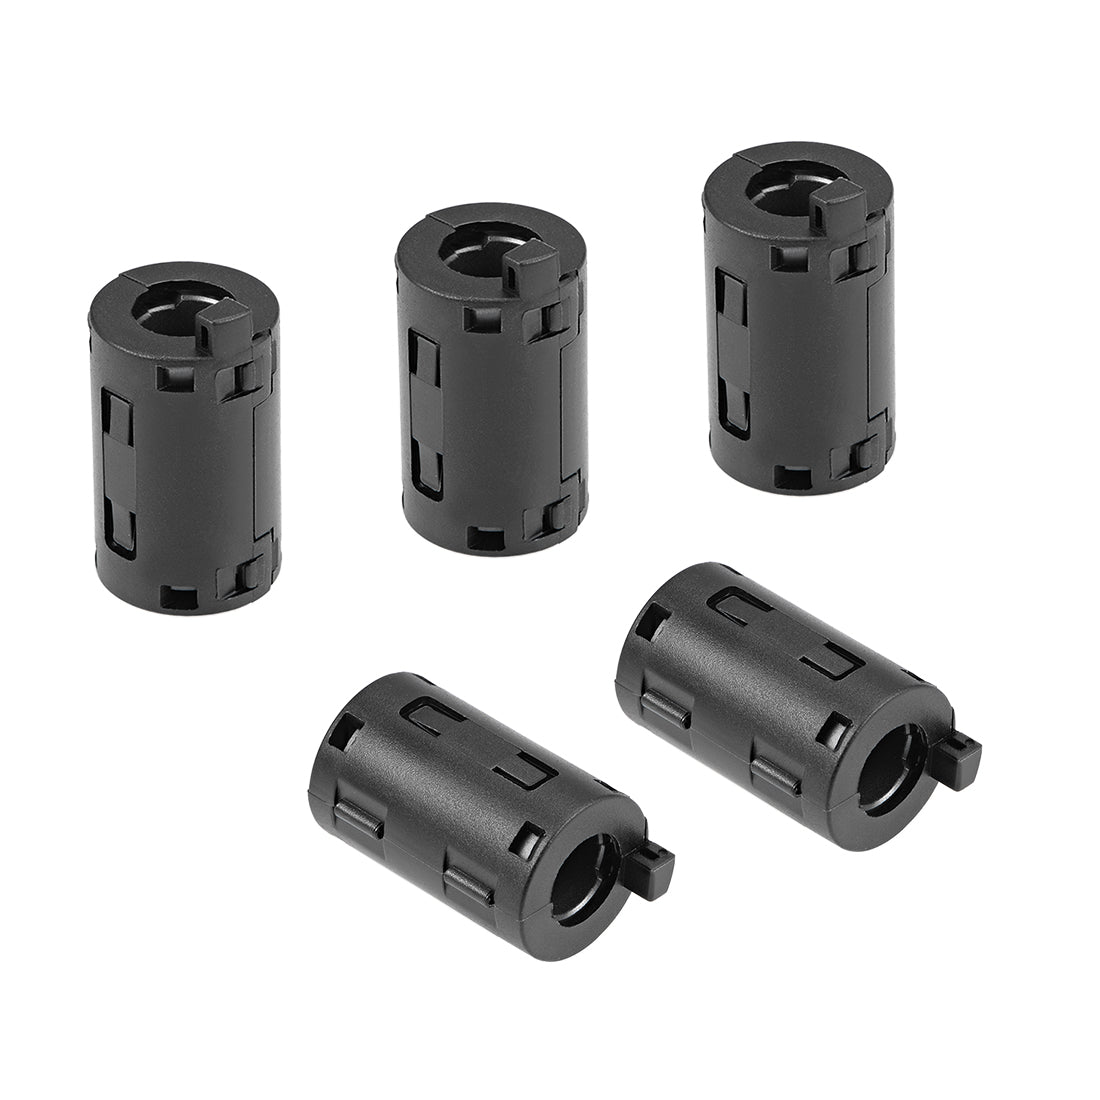 uxcell Uxcell 11mm Ferrite Cores Ring Clip-On RFI EMI Noise Suppression Filter Cable Clip, Black 5pcs